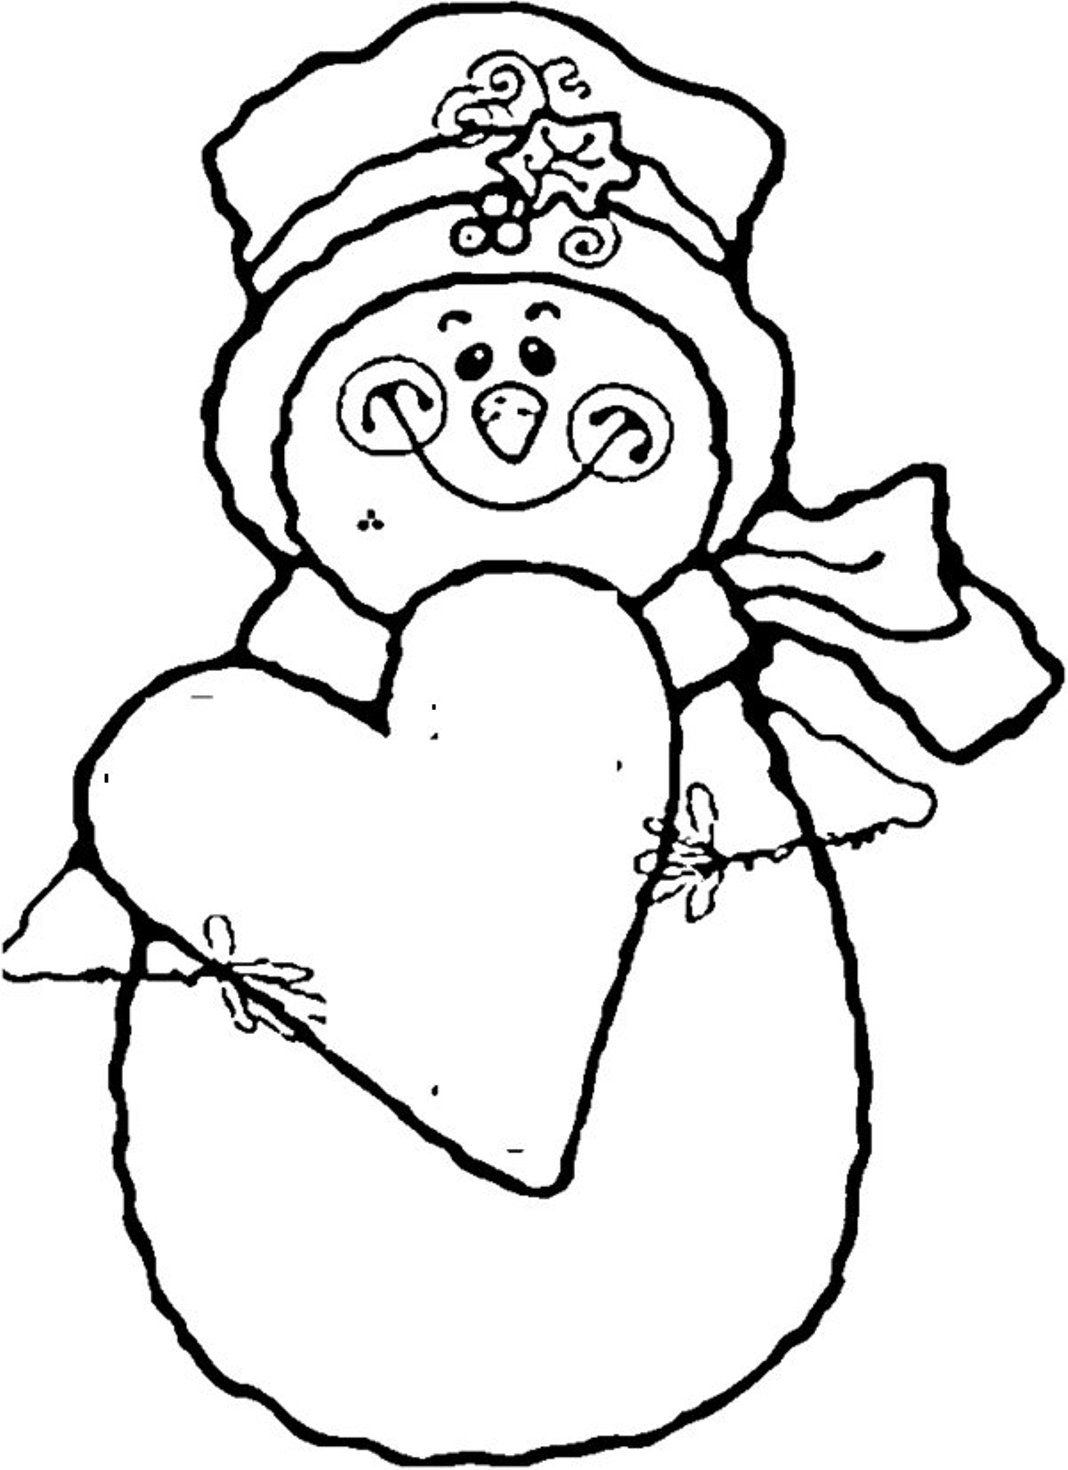 Heart And Snowman To Print Coloring Page